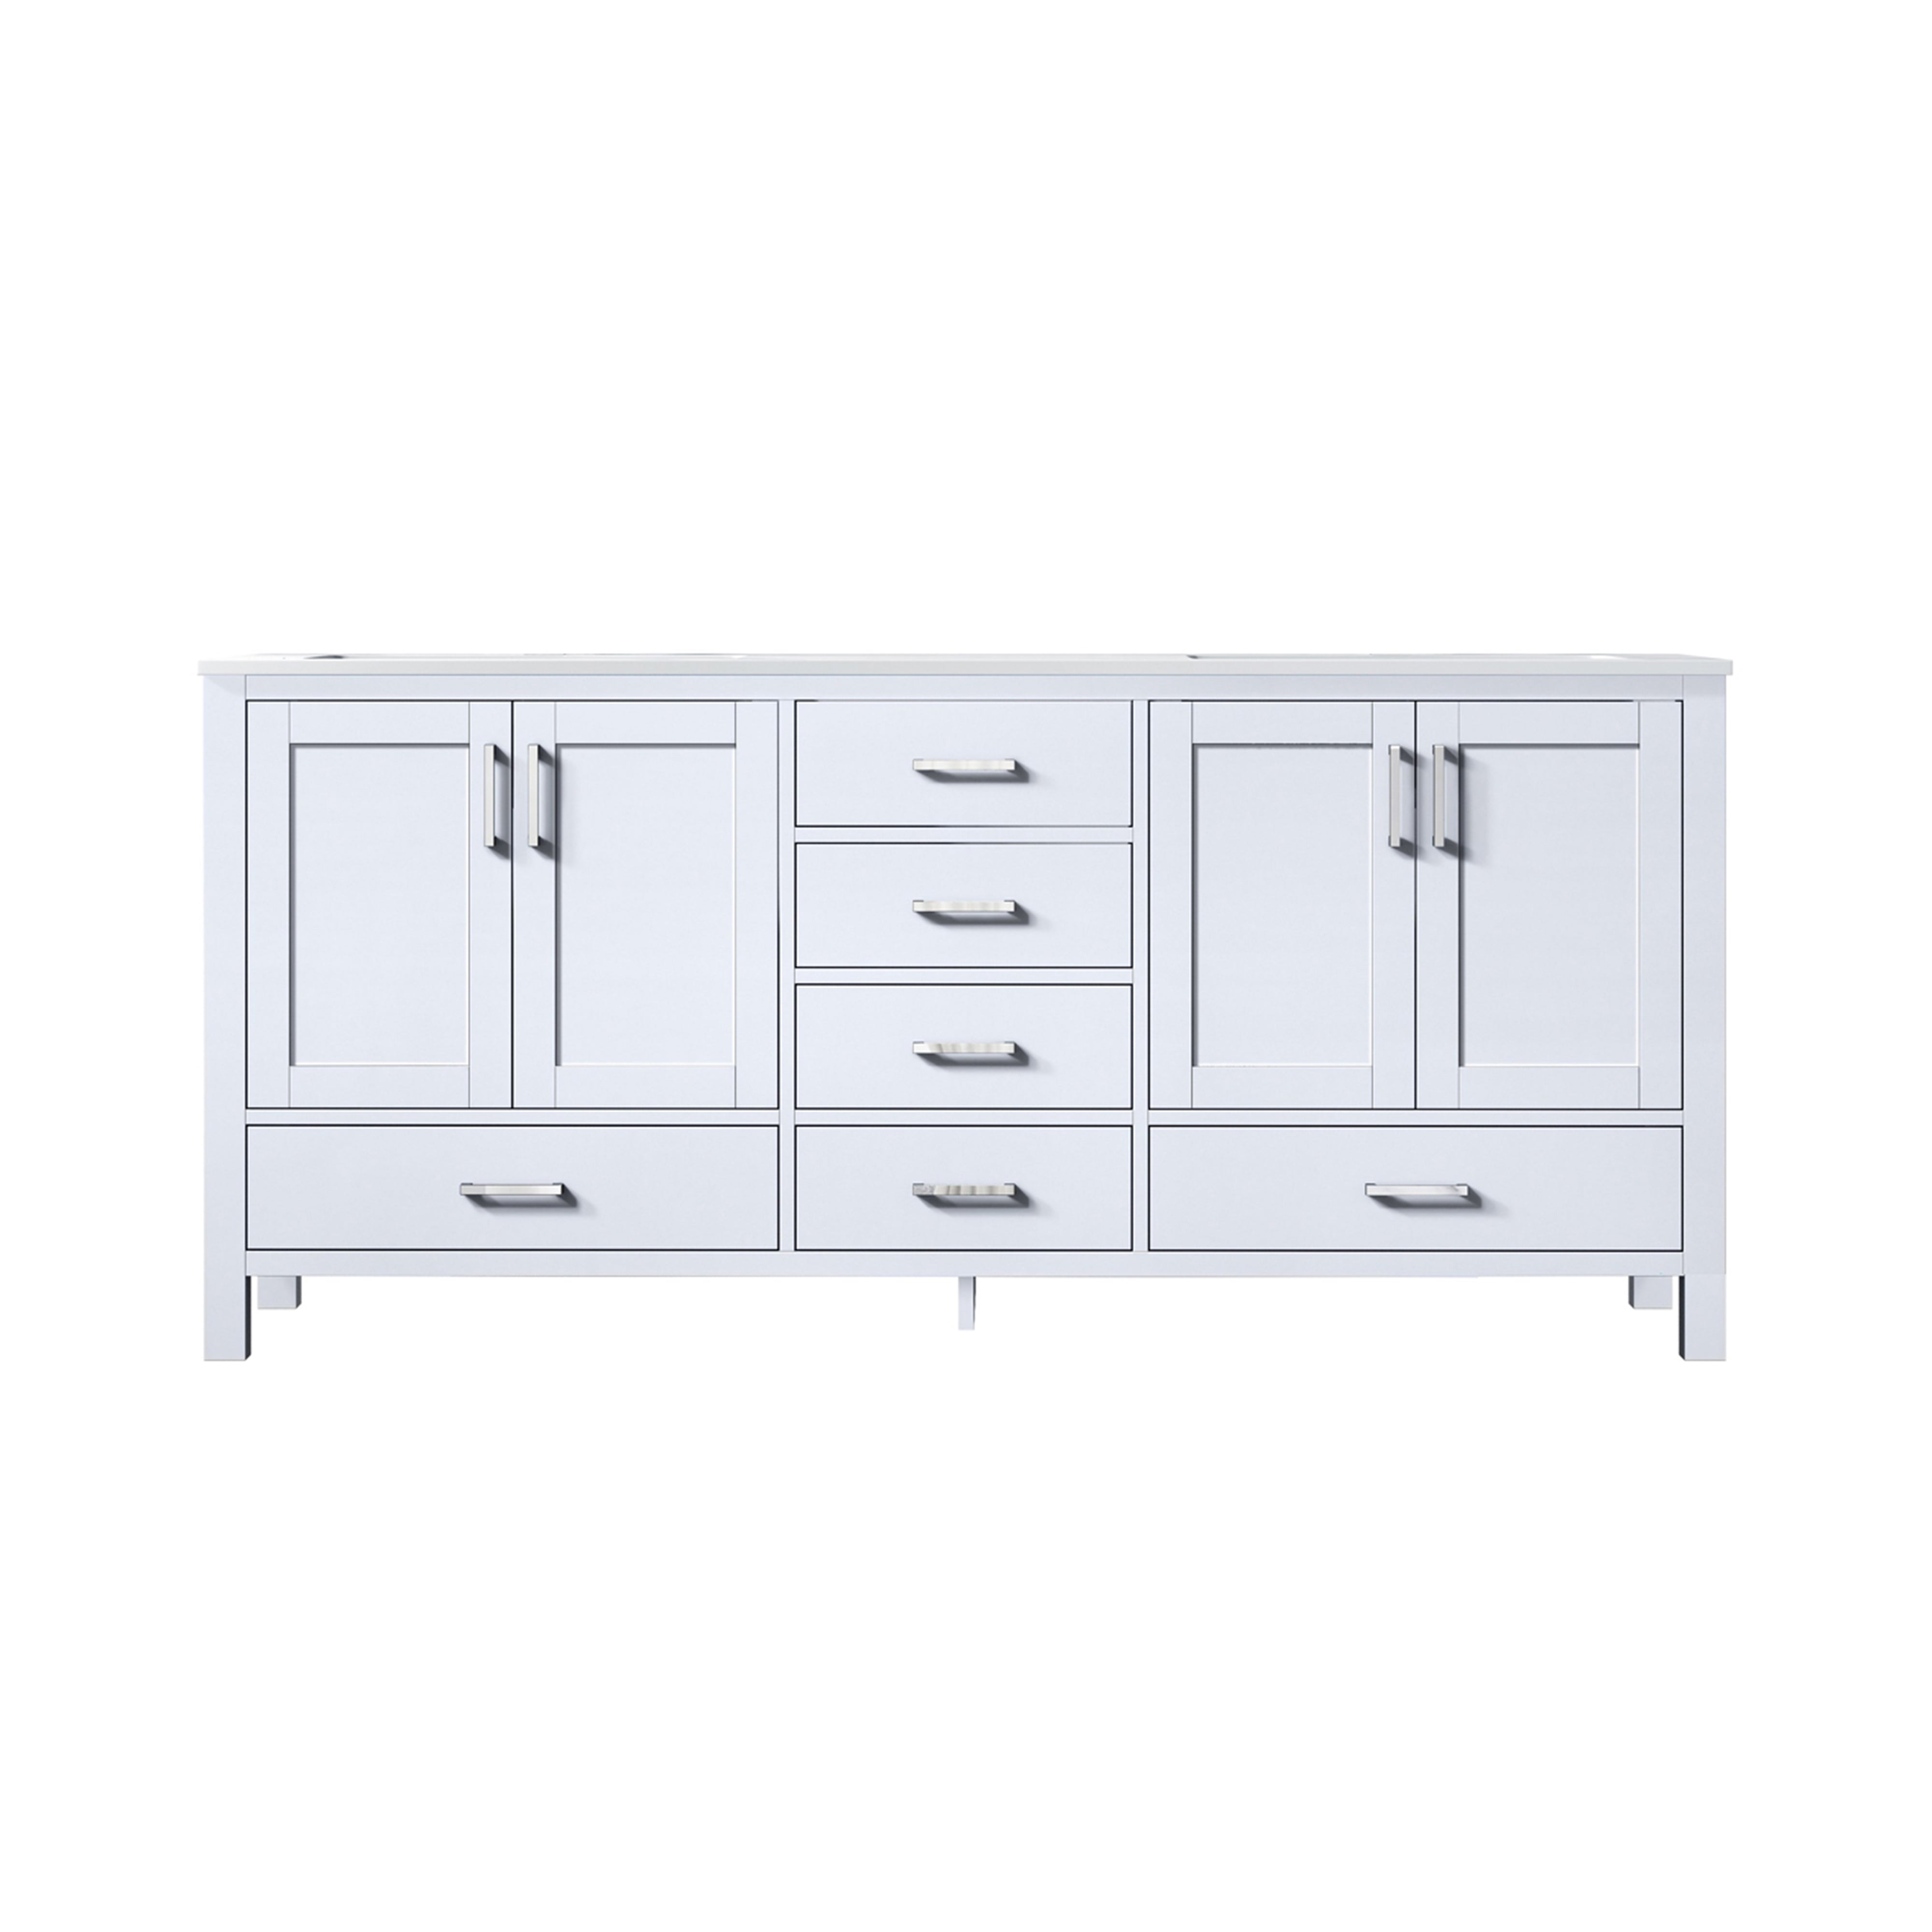 Lexora Jacques LJ342272DADS000 72" Double Bathroom Vanity in White with White Carrara Marble, White Rectangle Sinks, Front View